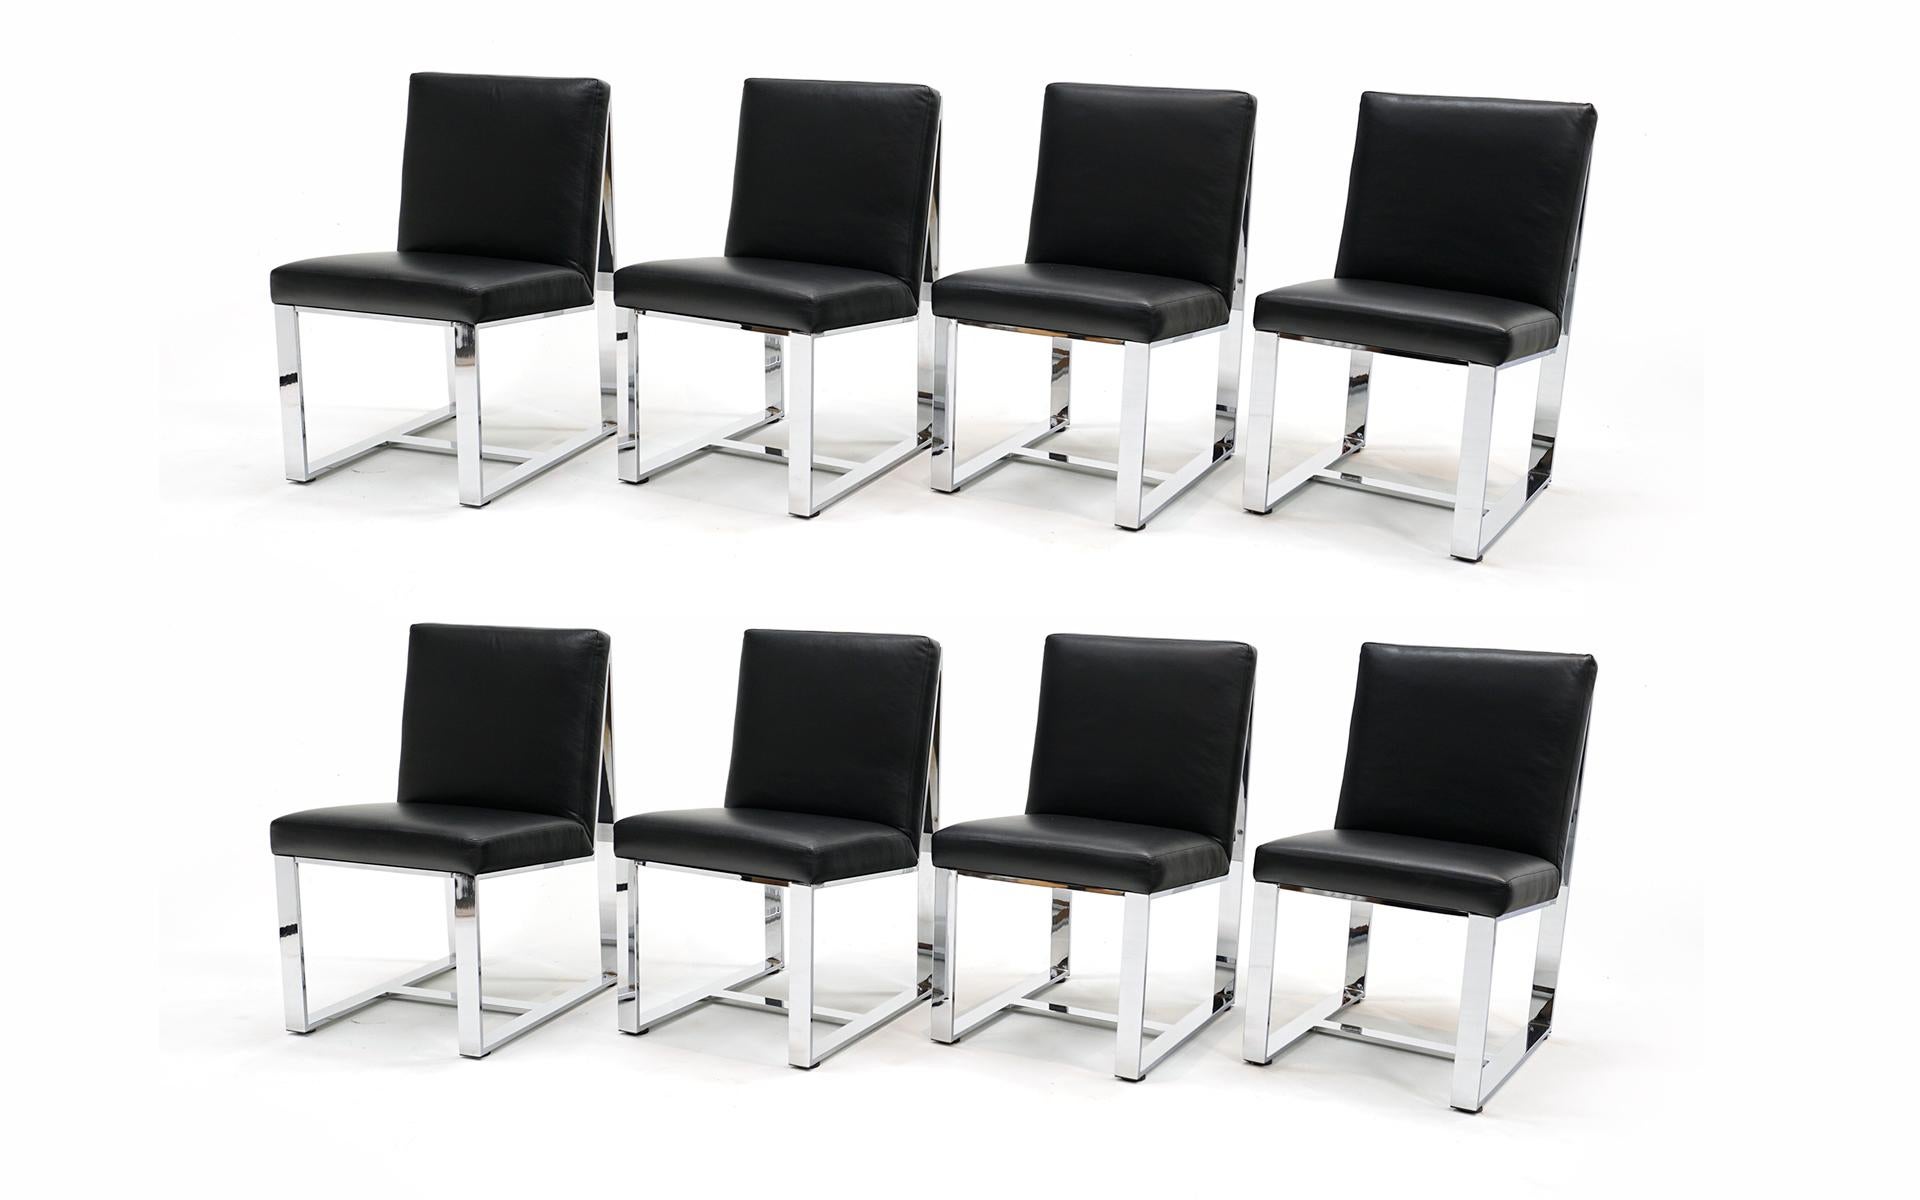 Set of 8 black leather and heavy chromed steel dining chairs designed by Milo Baughman for Thayer Coggin, 1970s.  Heavyweight comfortable design you can sit in for hours.  The leather was updated several years ago and shows little if any wear.  No